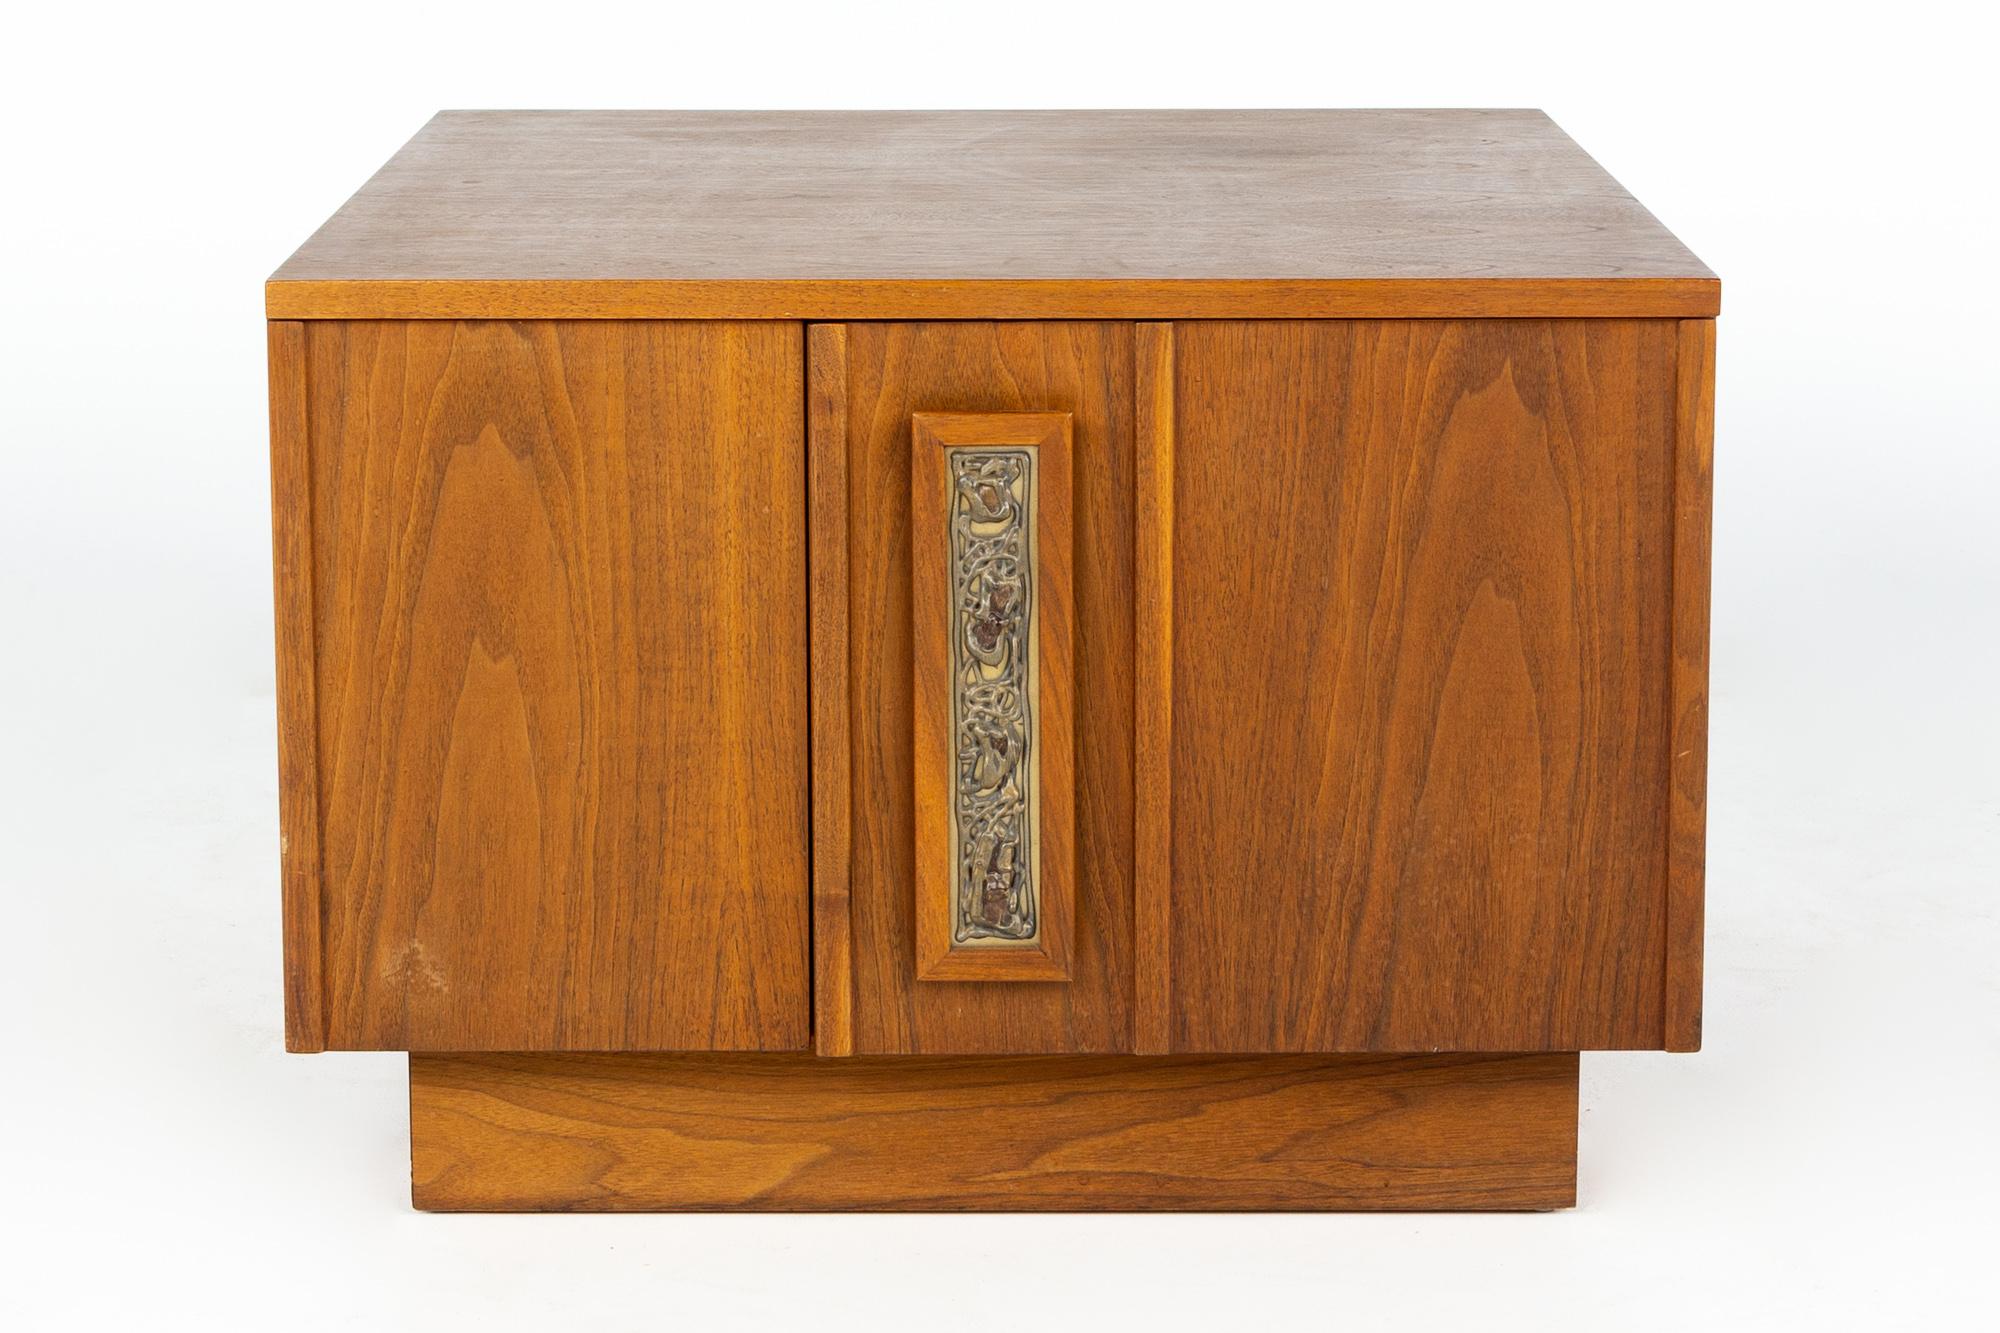 John Keal for Brown Saltman Mid Century Plinth Base 2 door cabinet

This cabinet measures: 22 wide x 16 deep x 19.25 inches high

All pieces of furniture can be had in what we call restored vintage condition. That means the piece is restored